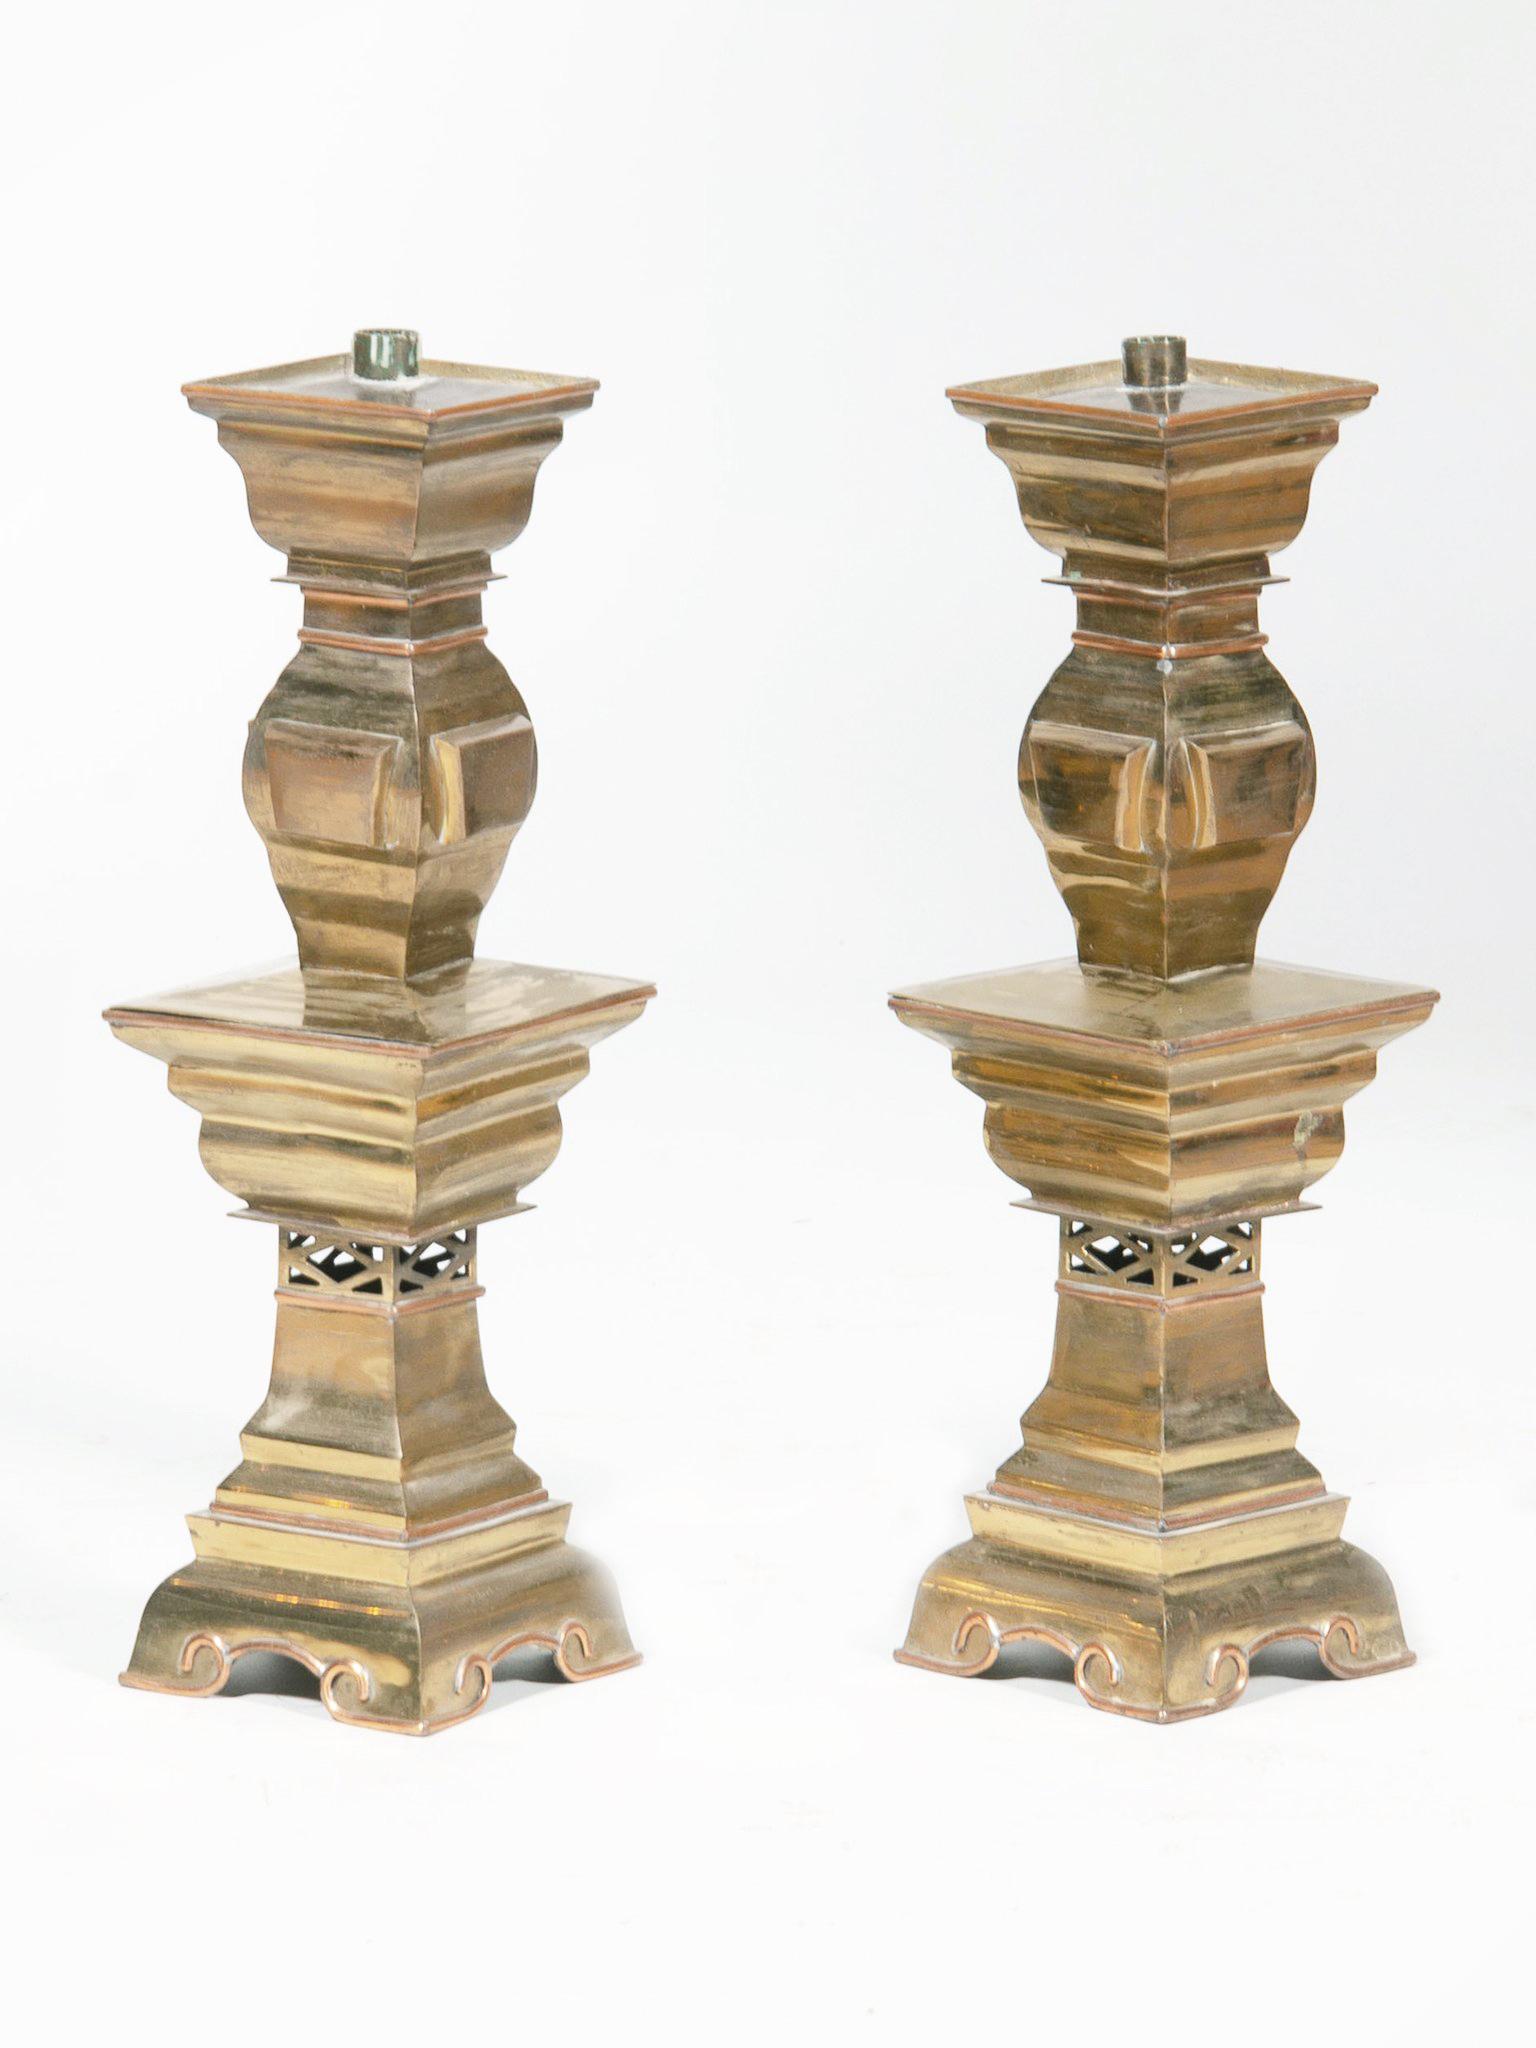 Hollywood Regency Pair of Mid-20th Century Brass Candlestick Lamps For Sale